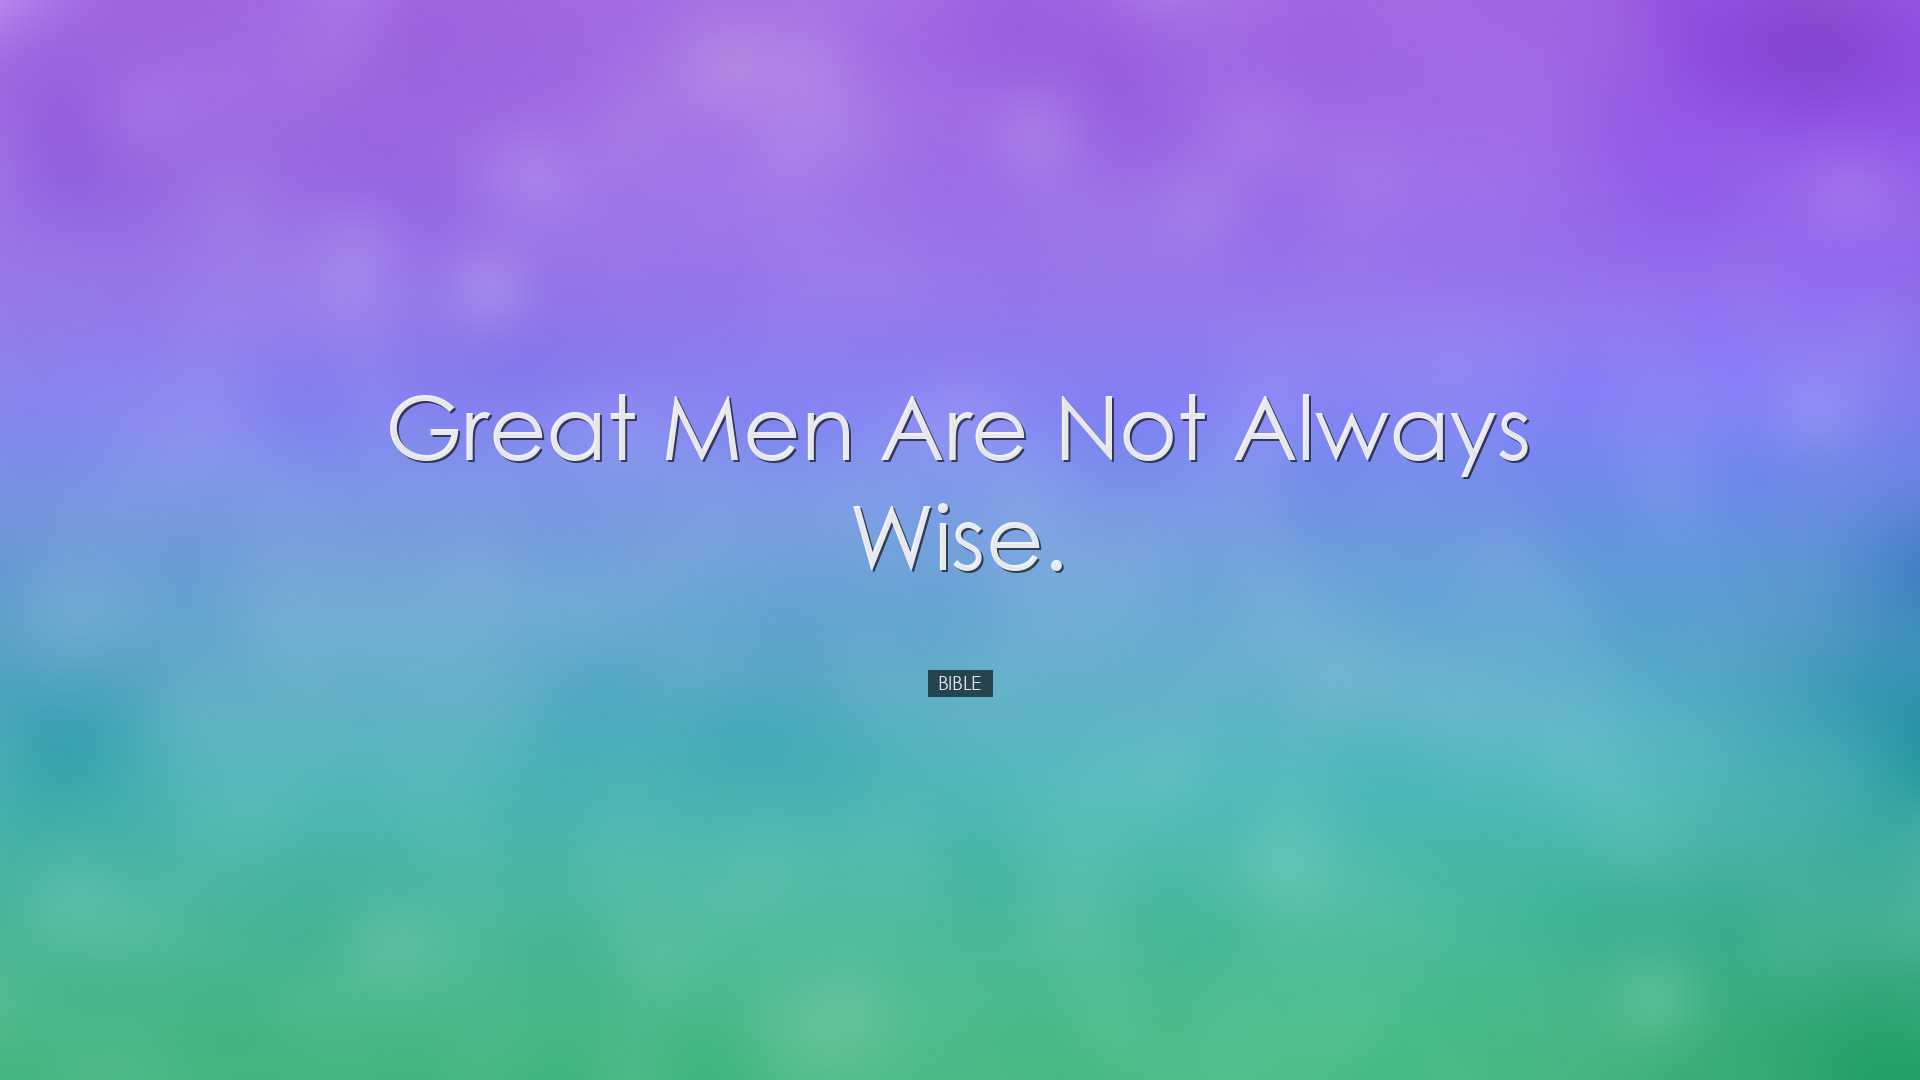 Great men are not always wise. - Bible